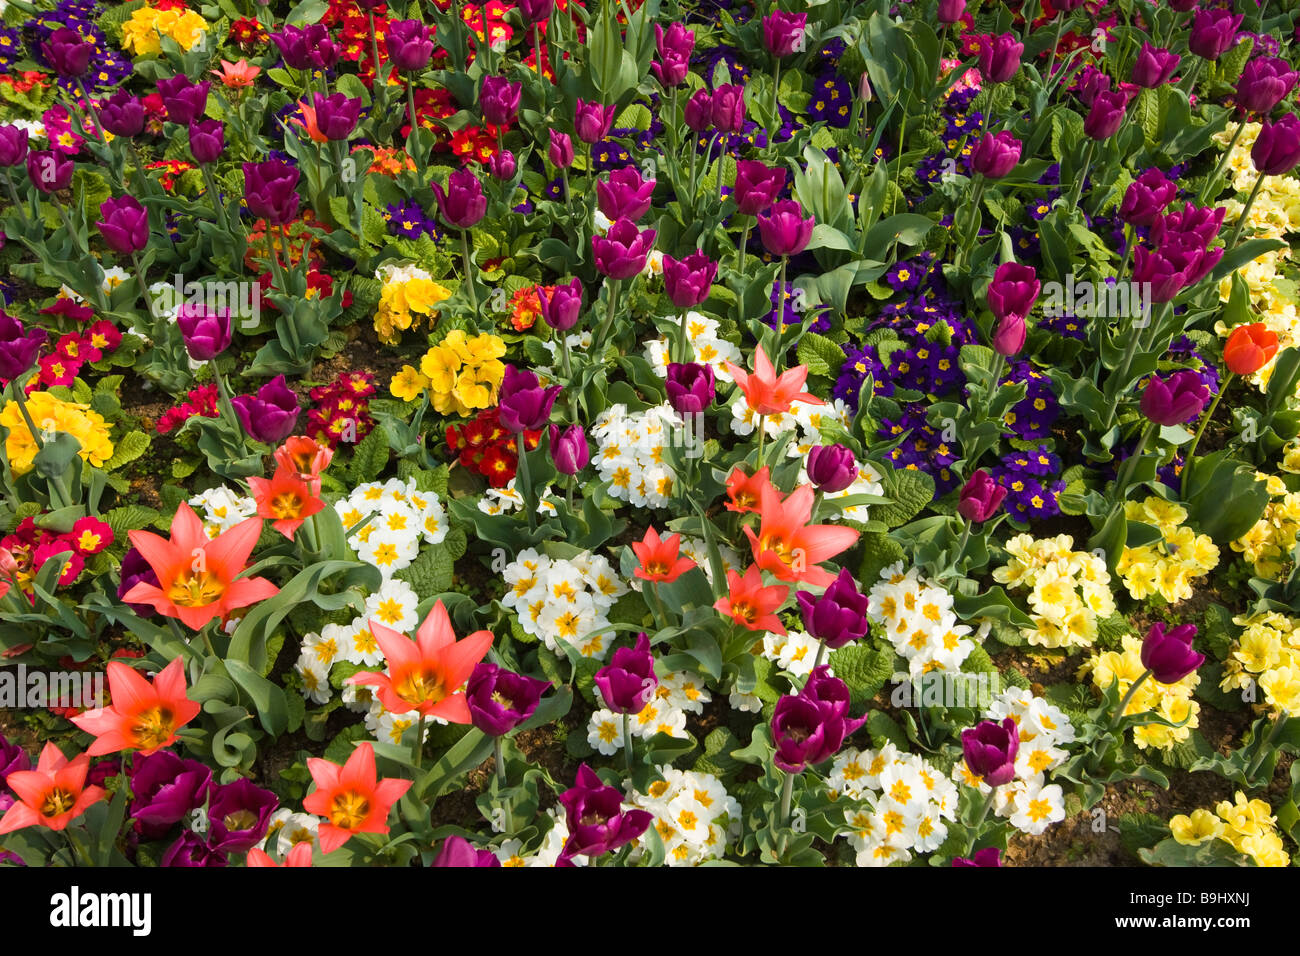 tulips and pansies Stock Photo